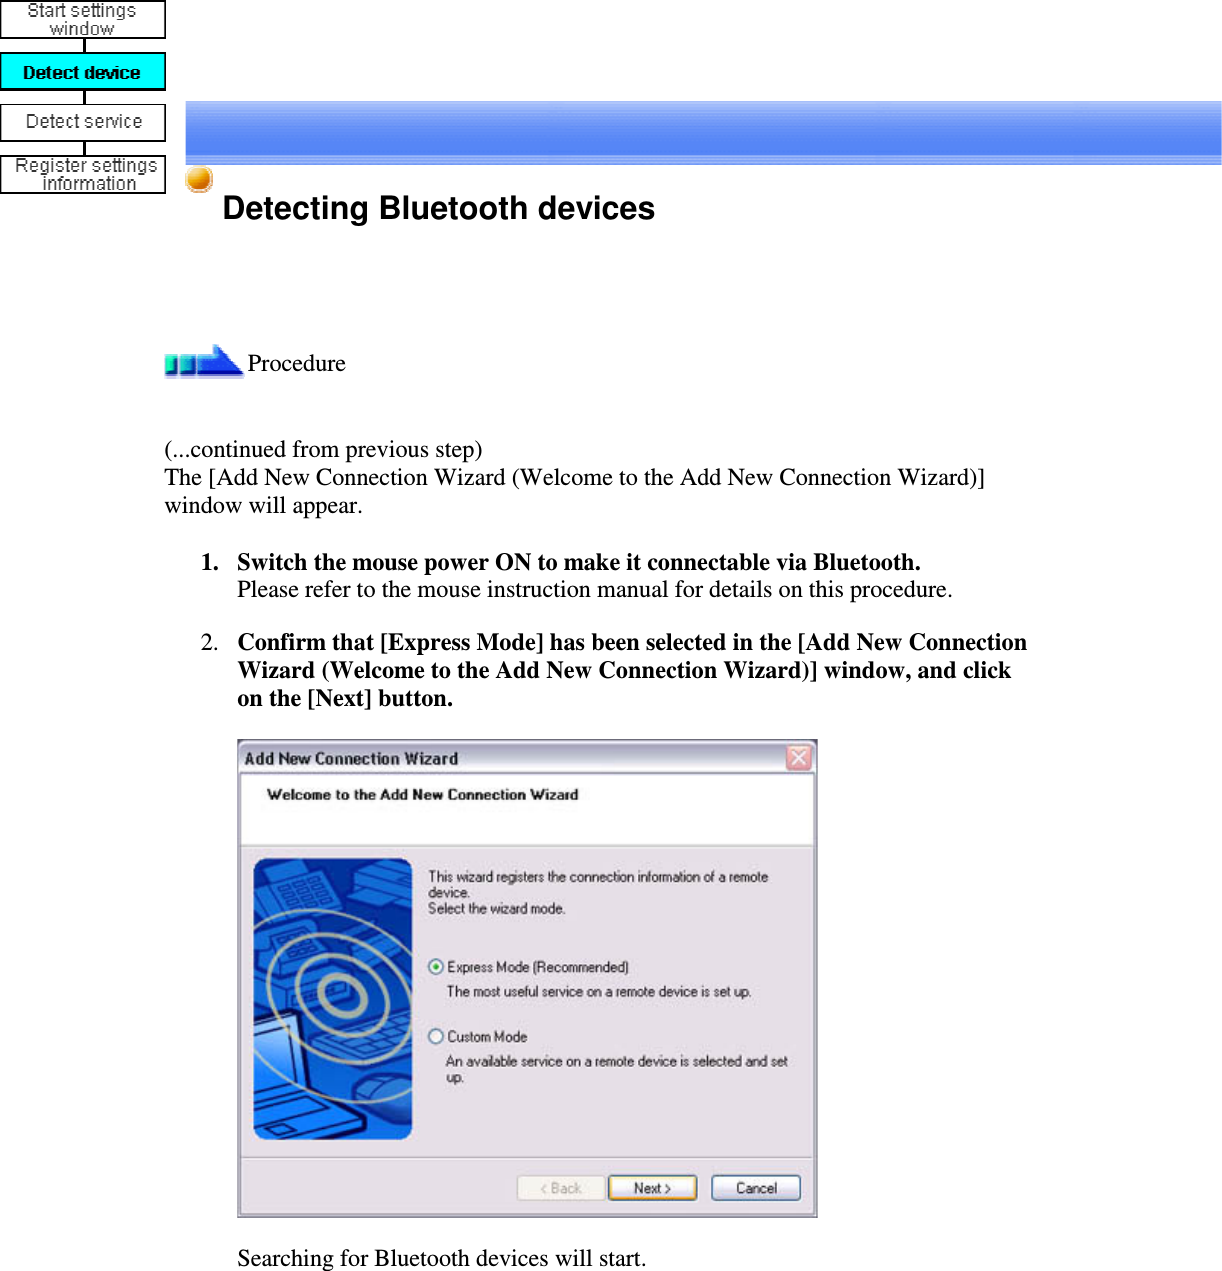 Detecting Bluetooth devicesProcedure(...continued from previous step)The [Add New Connection Wizard (Welcome to the Add New Connection Wizard)]window will appear.1. Switch the mouse power ON to make it connectable via Bluetooth.Please refer to the mouse instruction manual for details on this procedure.2. Confirm that [Express Mode] has been selected in the [Add New ConnectionWizard (Welcome to the Add New Connection Wizard)] window, and clickon the [Next] button.Searching for Bluetooth devices will start.